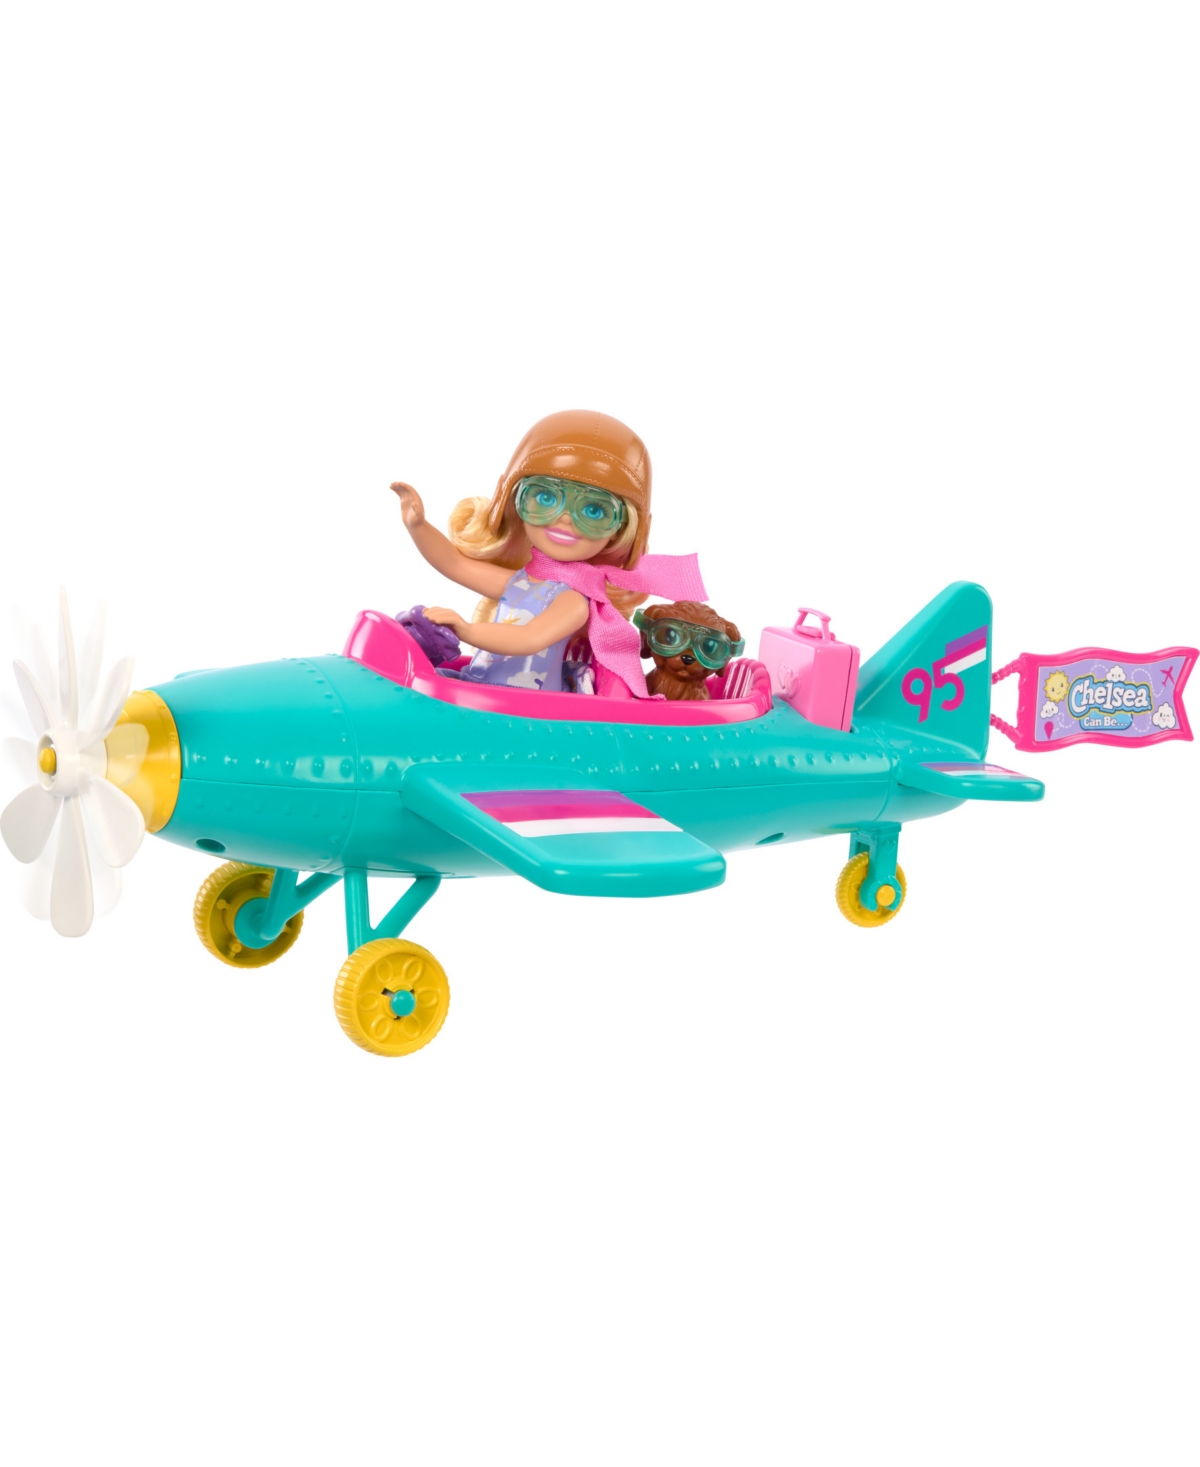 Barbie Chelsea Can Be Plane Doll And Play Set, 2-seater Aircraft With Spinning Propeller And 7 Accessories In Multi